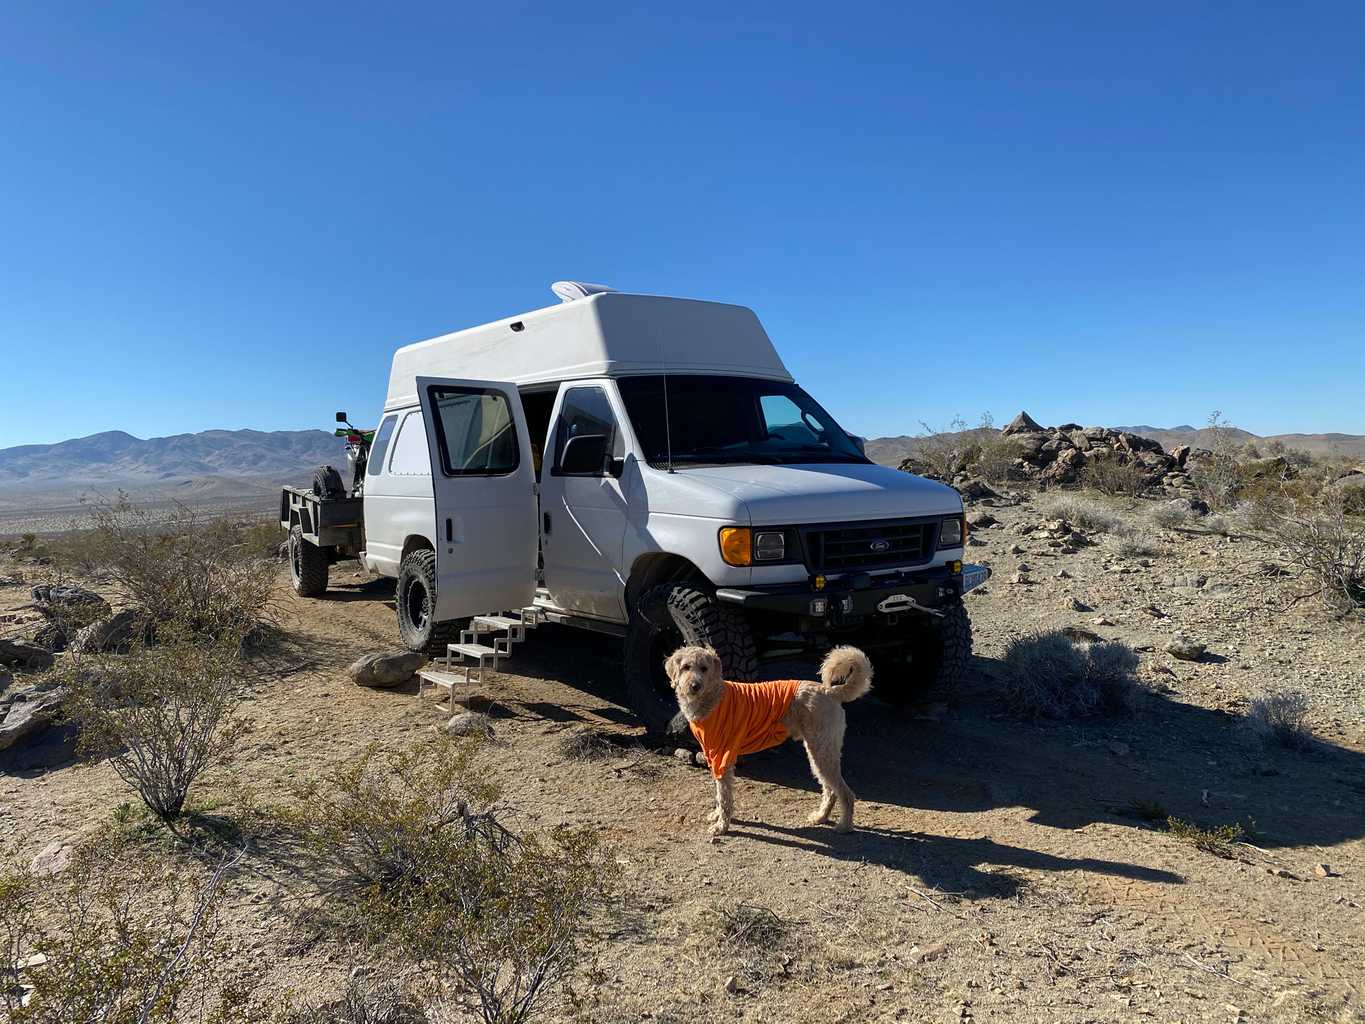 Our van and motorcycle trailer parked in the desert in California, with the clamshell door open and stairs out. Rainier the labradoodle is in the foreground in his orange t-shirt.